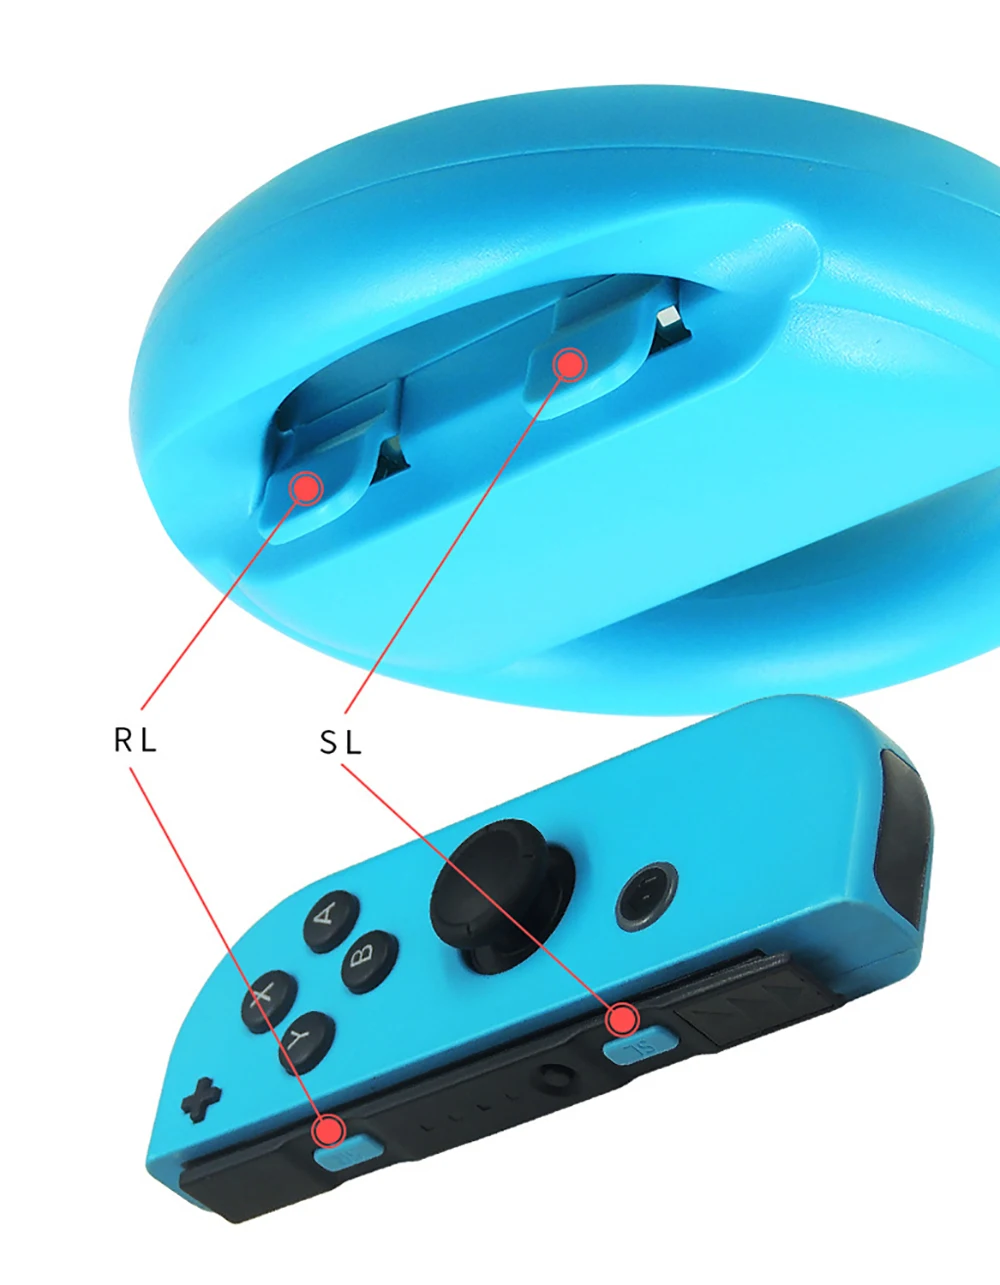 2Pcs Game Steering Wheel Racing Handle  For Mario Kart Nintendo Switch Joy-Con Controlle Holder For NS Mario Kart  Accessories images - 6